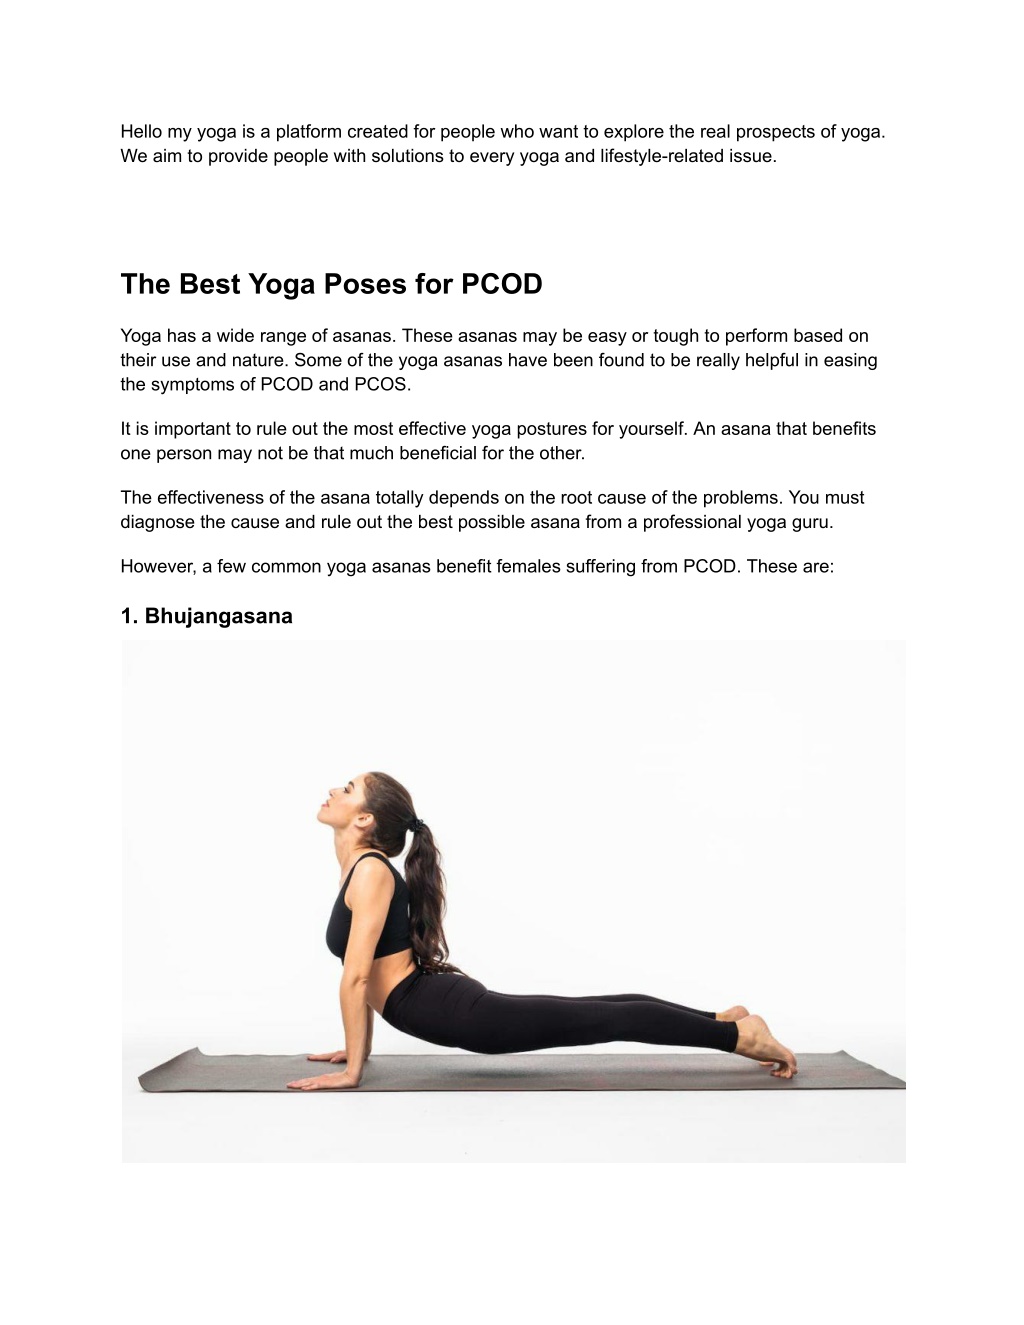 Benefits of Practicing Yoga for PCOS Treatment